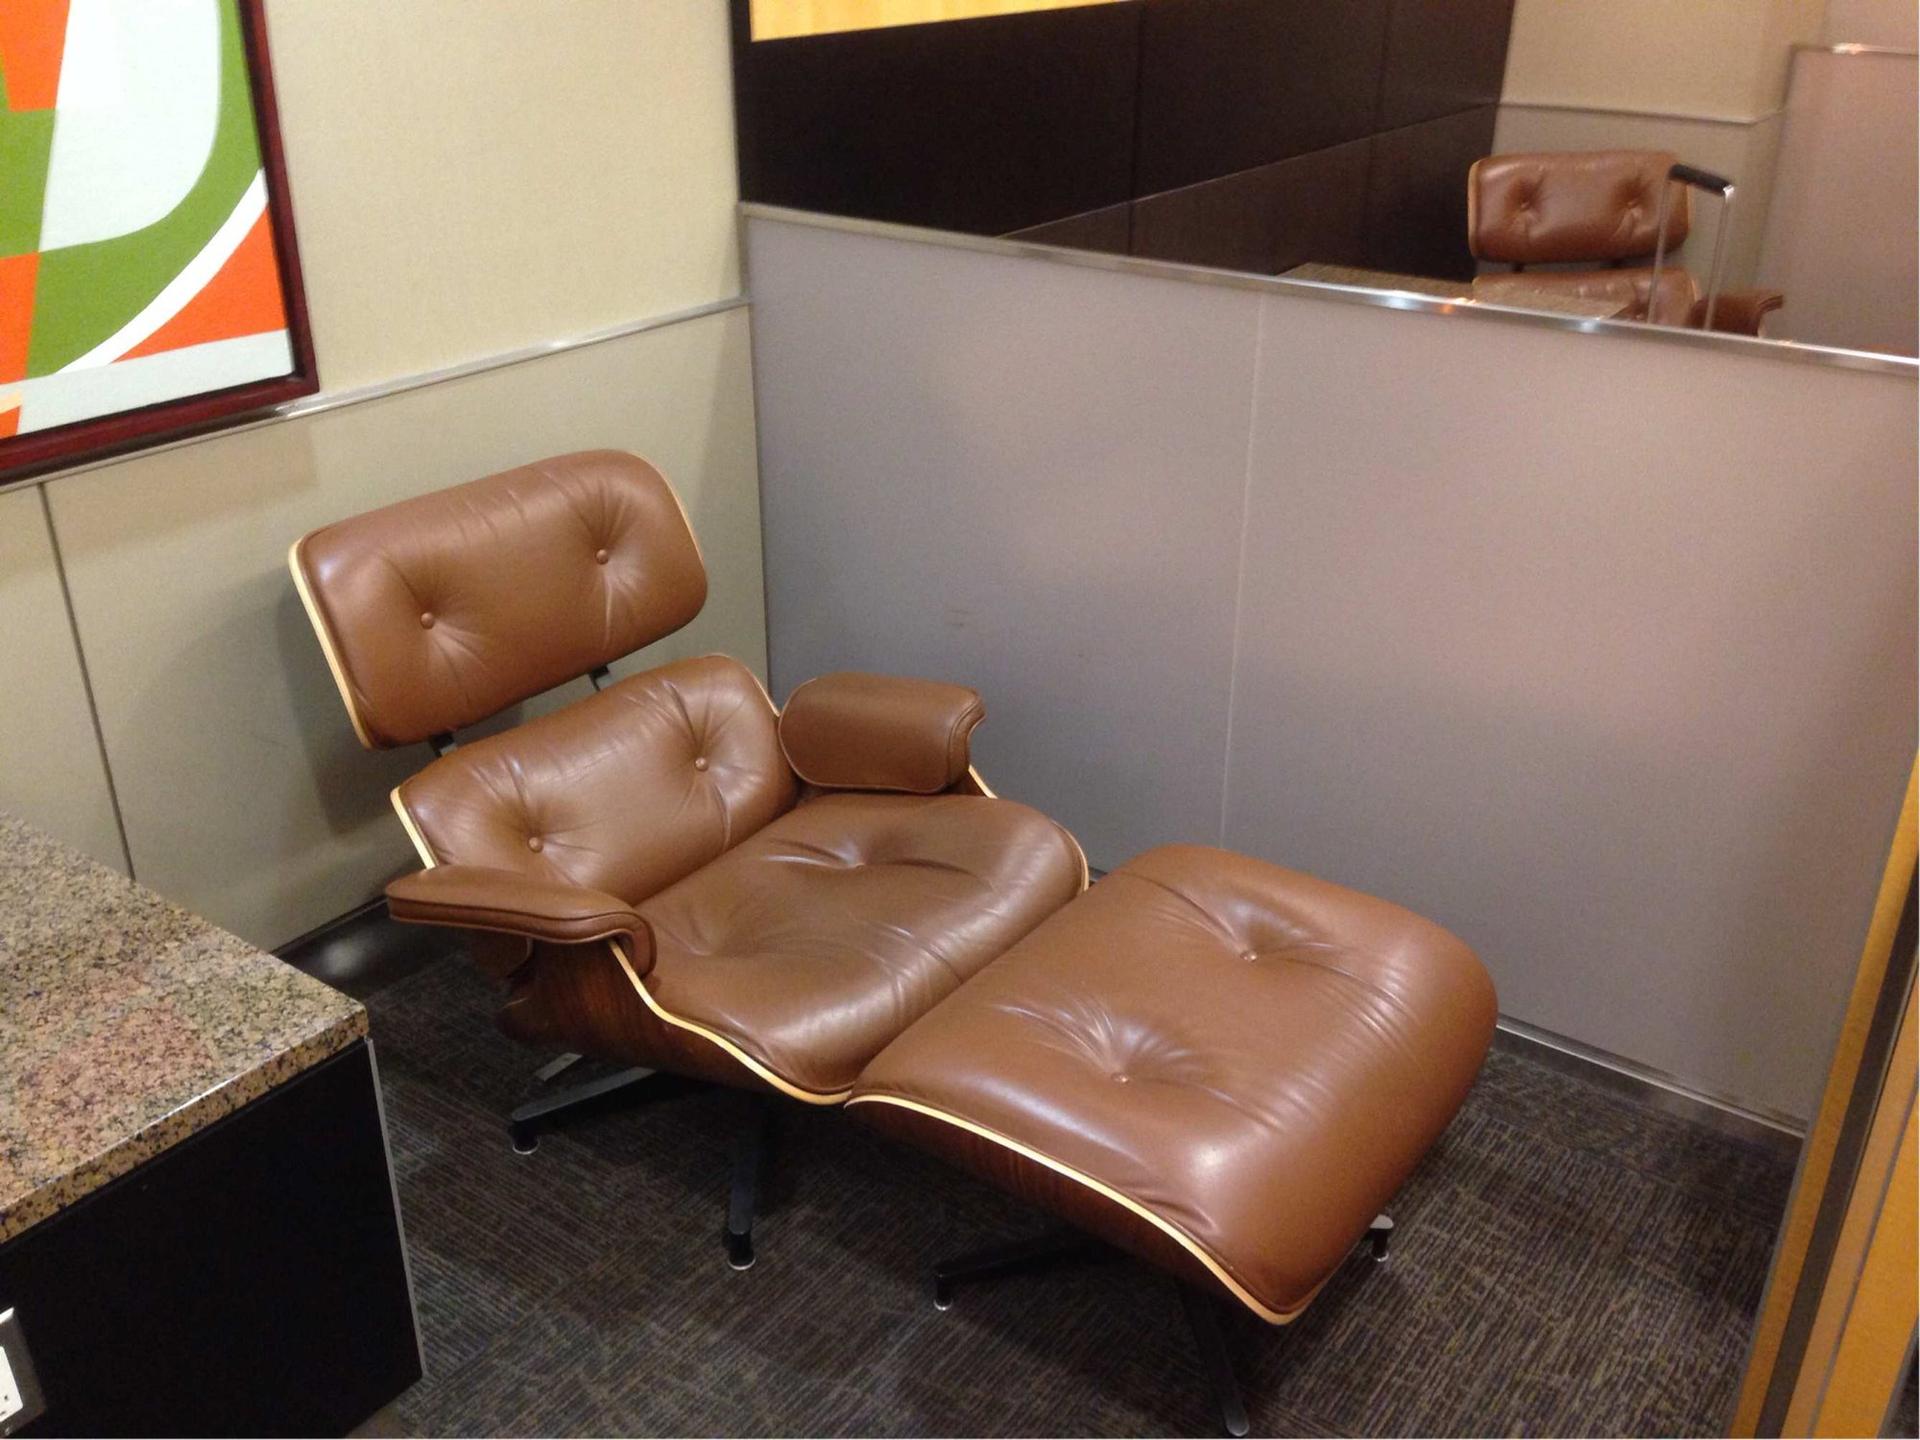 American Airlines Admirals Club image 7 of 25